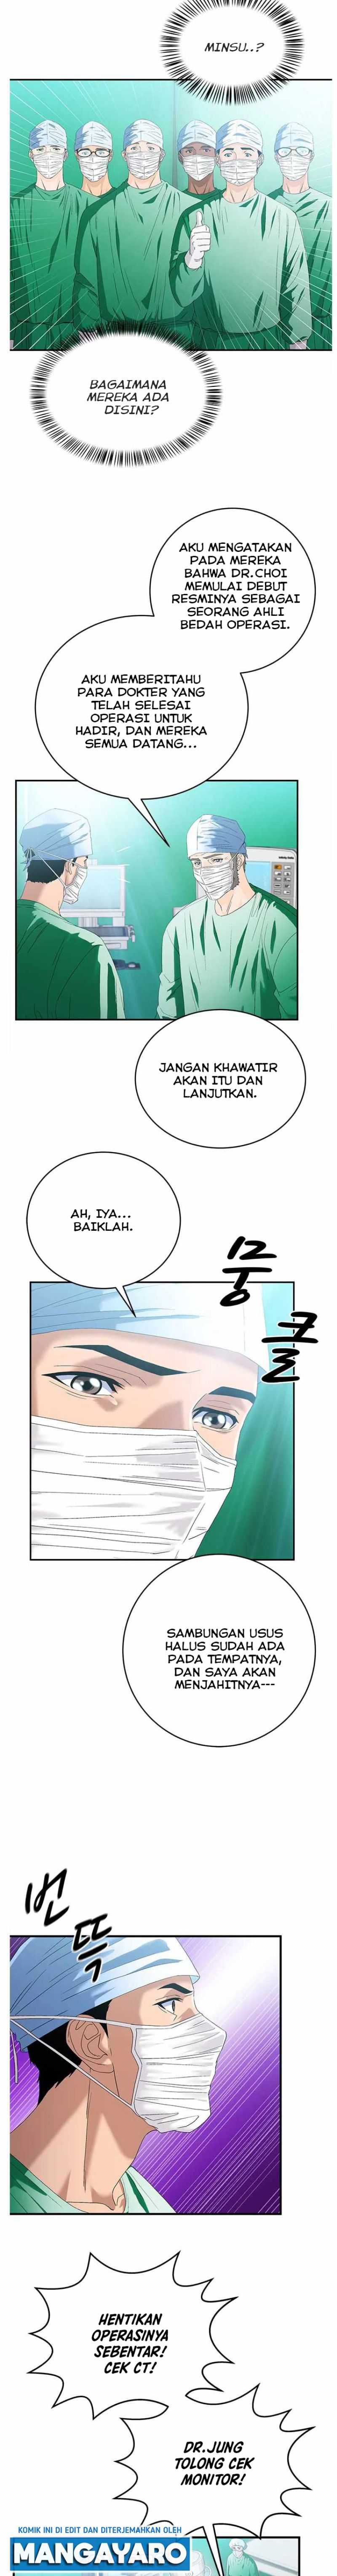 Dr. Choi Tae-Soo Chapter 67